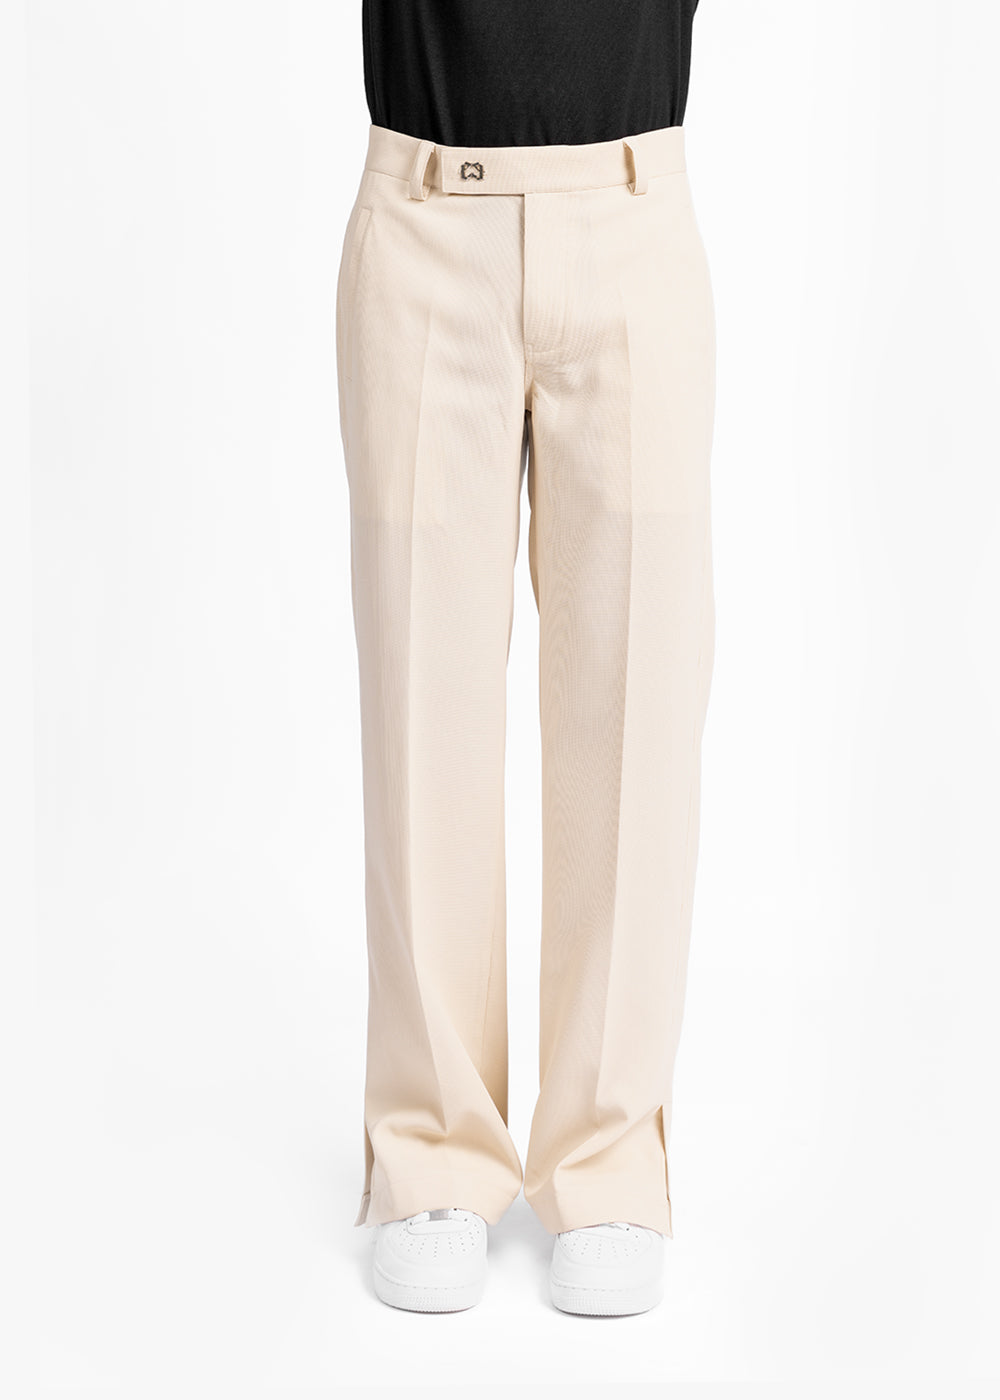 Buy Men's Waffle Knit Cream Relaxed Fit Pant Online | SNITCH